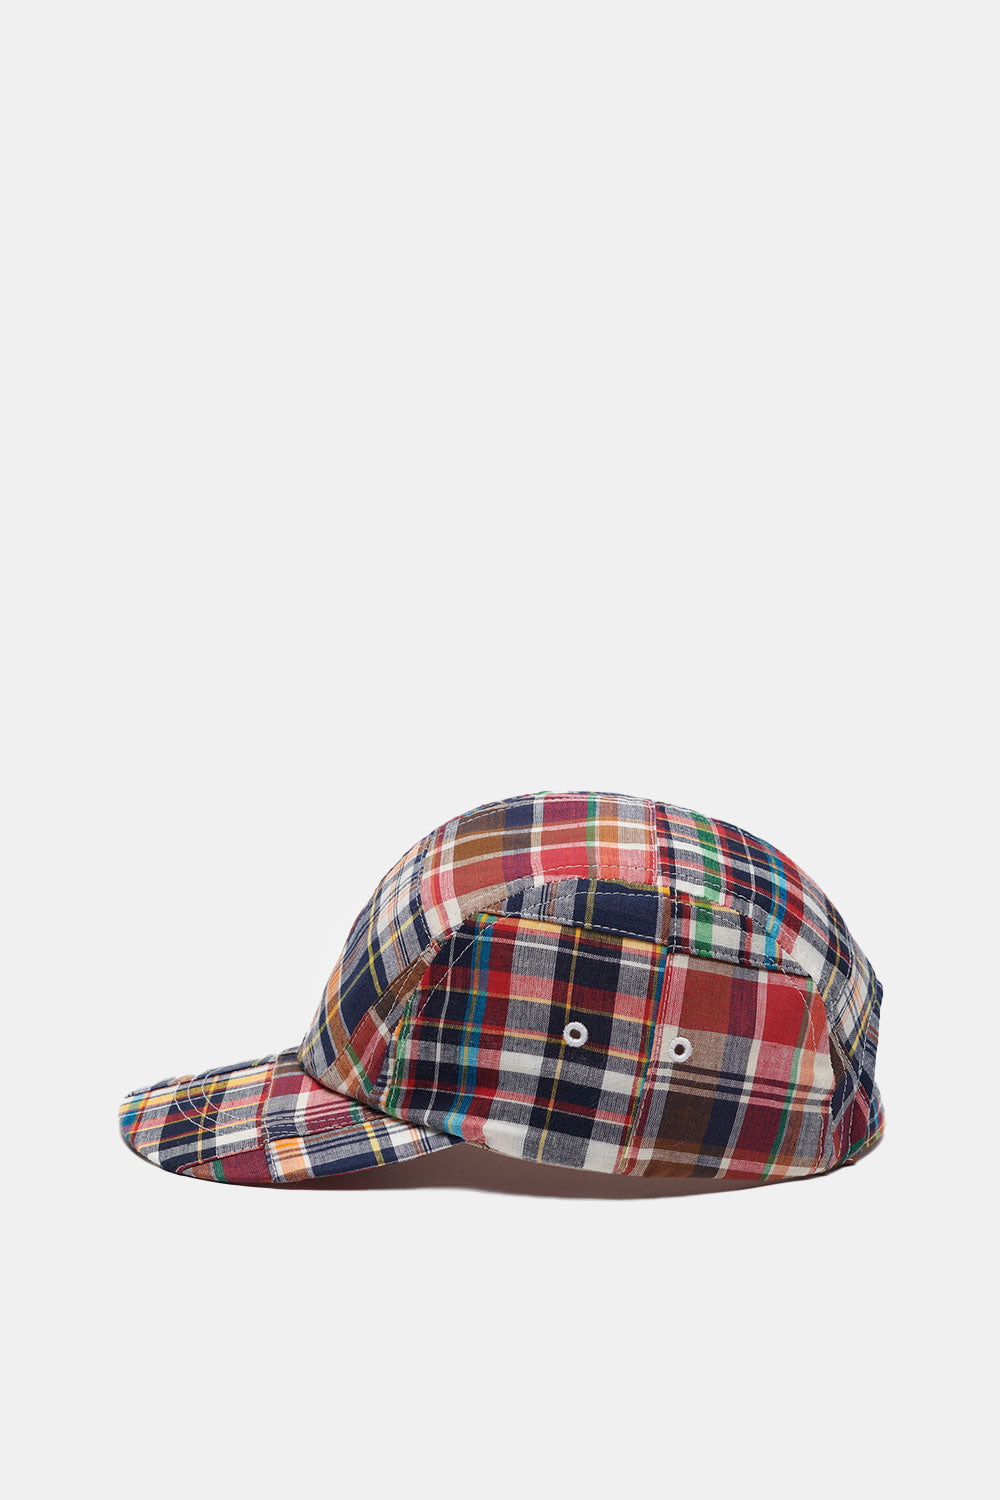 Anonymous Ism Madras Patchwork Cap (Patchwork)